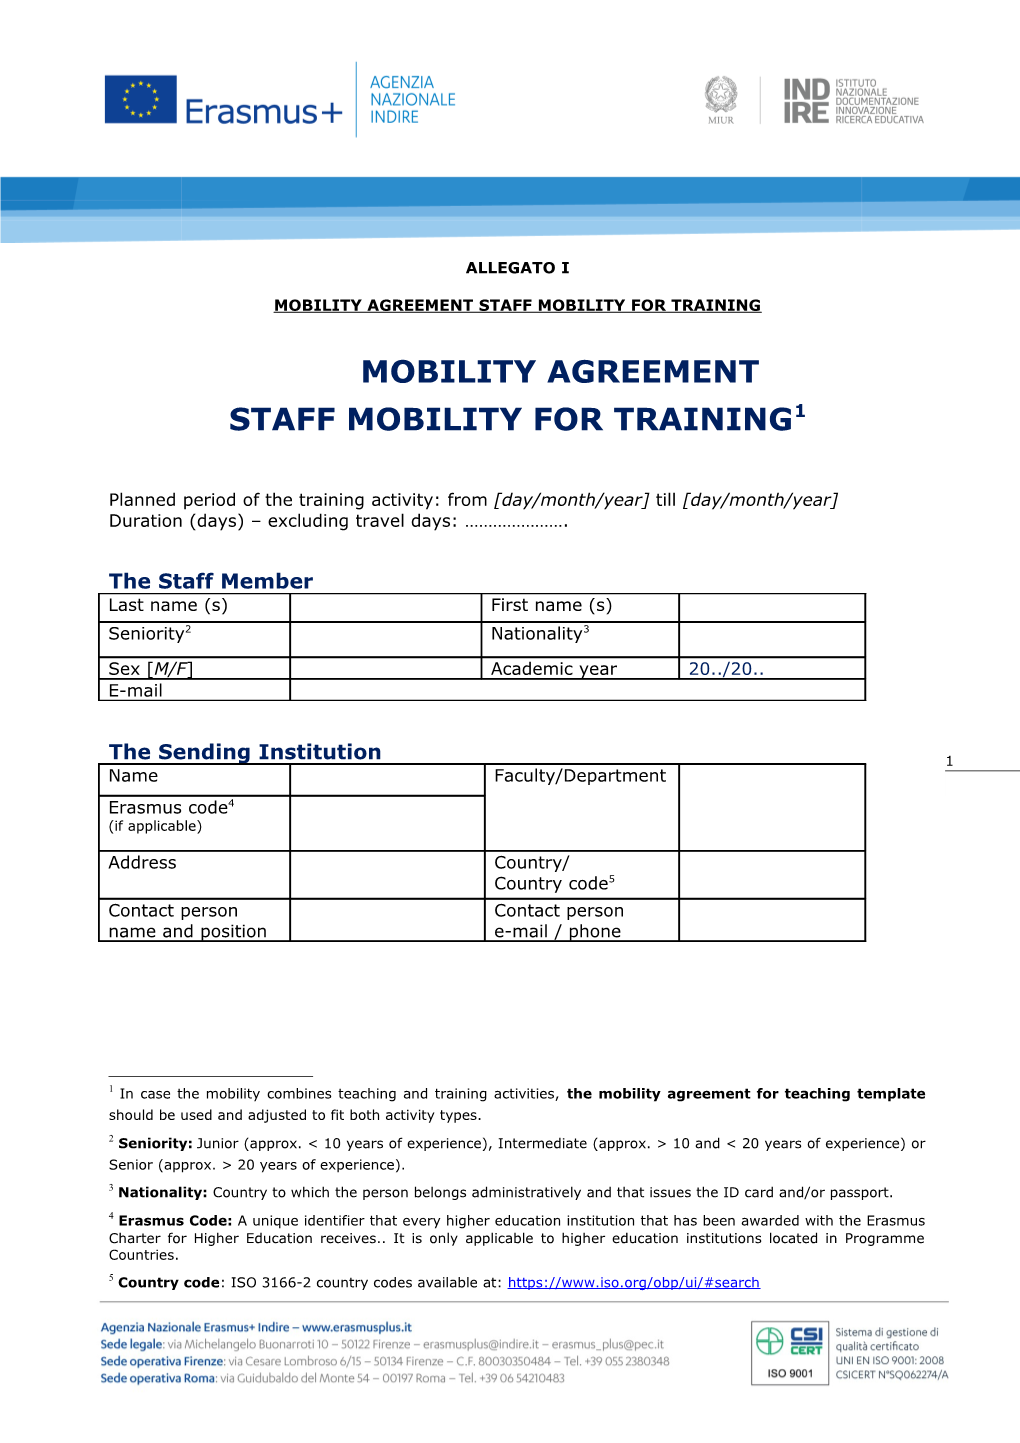 Mobility Agreement Staff Mobility for Training